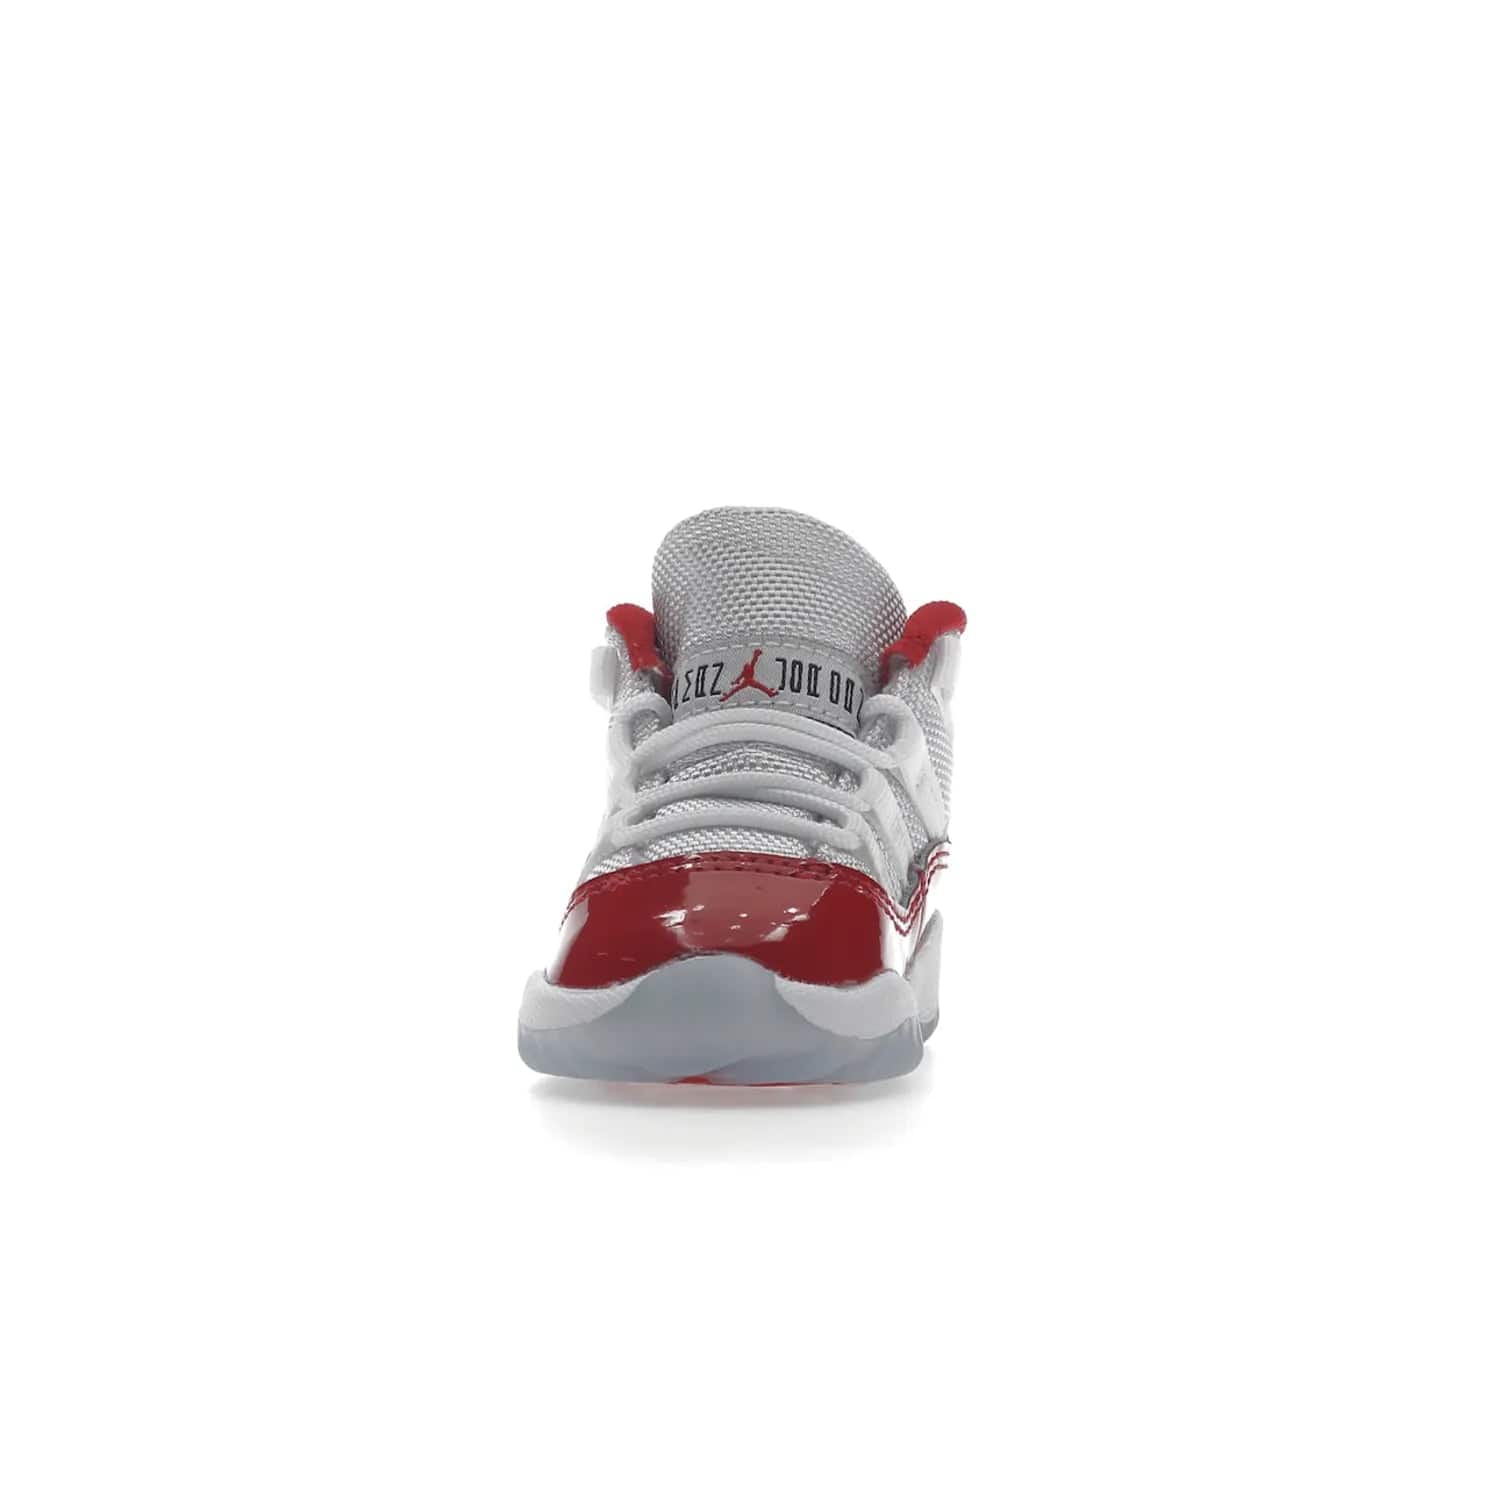 Jordan 11 Retro Cherry (2022) (TD) - Image 11 - Only at www.BallersClubKickz.com - Timeless classic. Air Jordan 11 Retro Cherry 2022 TD combines mesh, leather & suede for a unique look. White upper with varsity red suede. Jumpman logo on collar & tongue. Available Dec 10th, priced at $80.